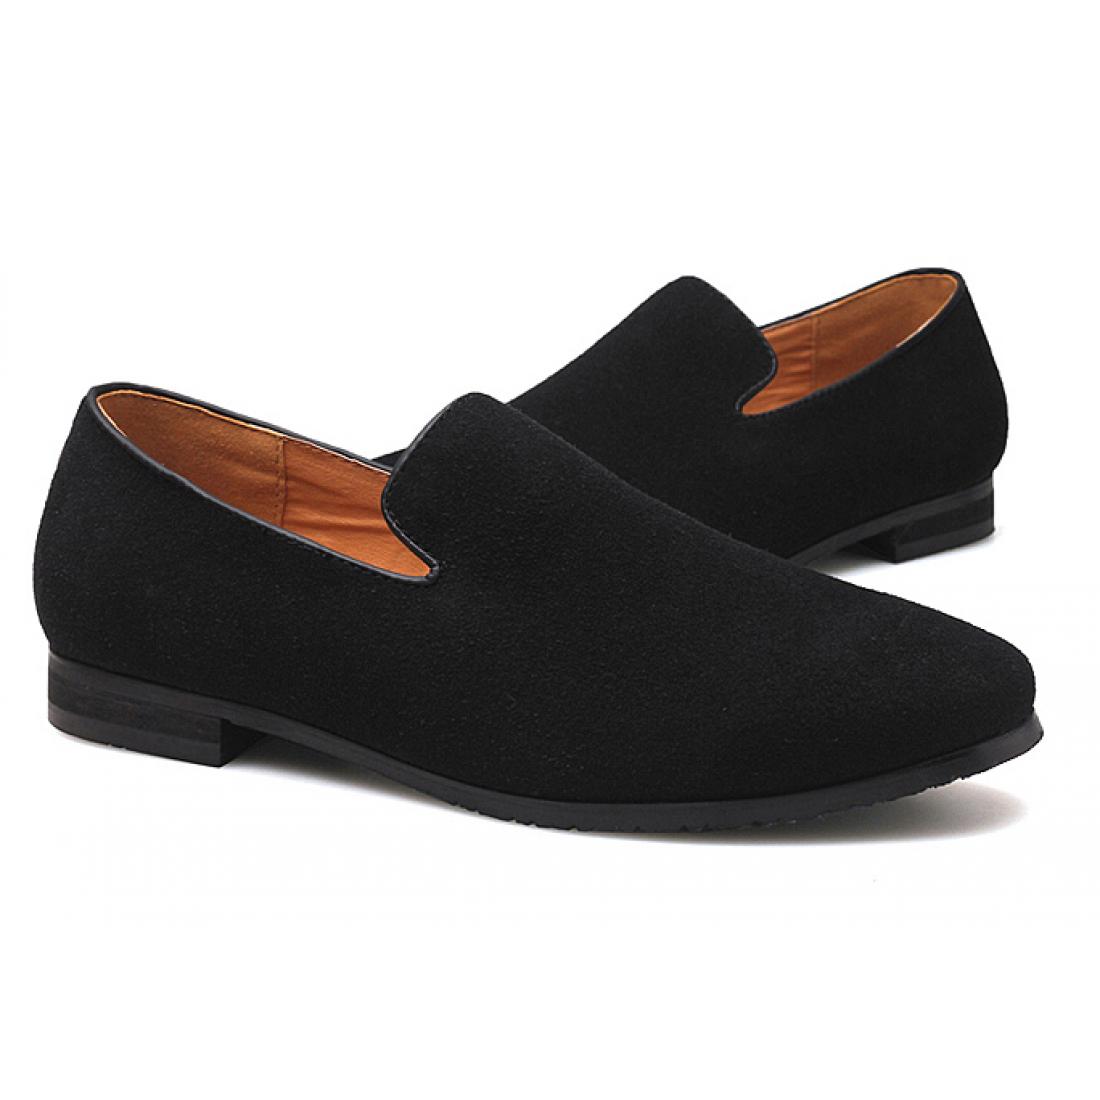 Black Suede Dapper Mens Prom Loafers Dress Shoes Loafers